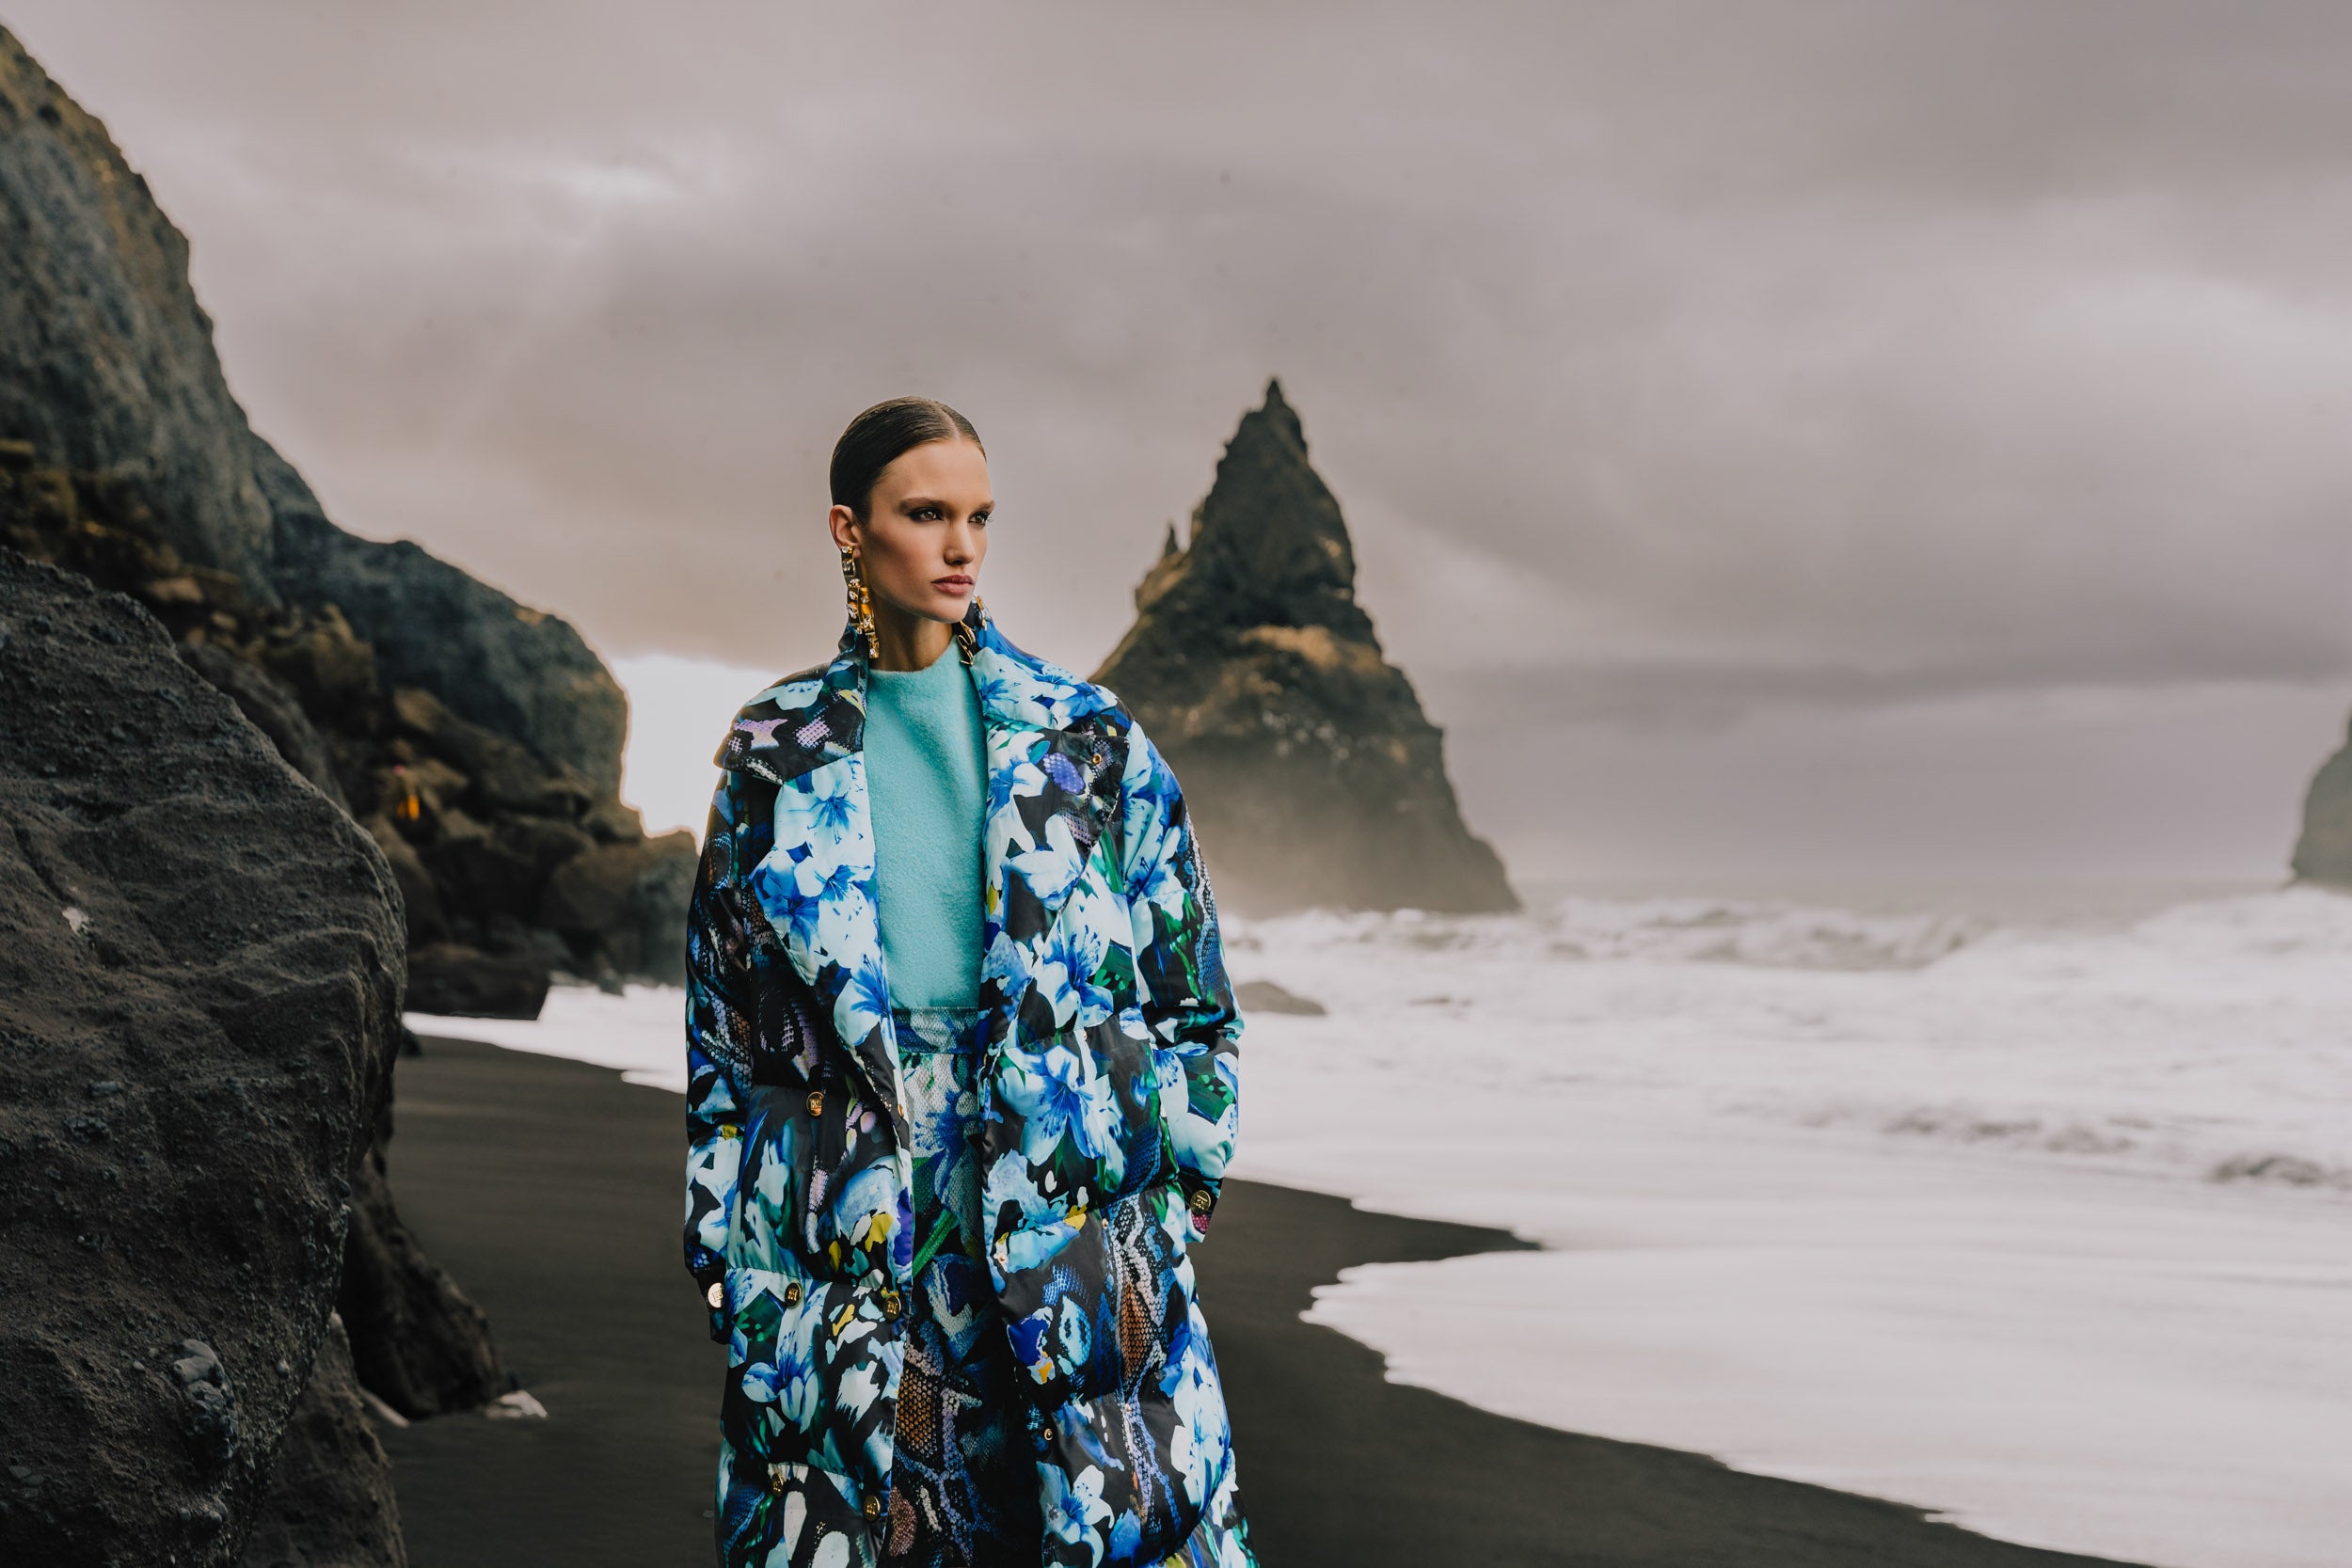 ESCADA MAINLINE INTRODUCES THE NEW FALL / WINTER 2023 CAMPAIGN